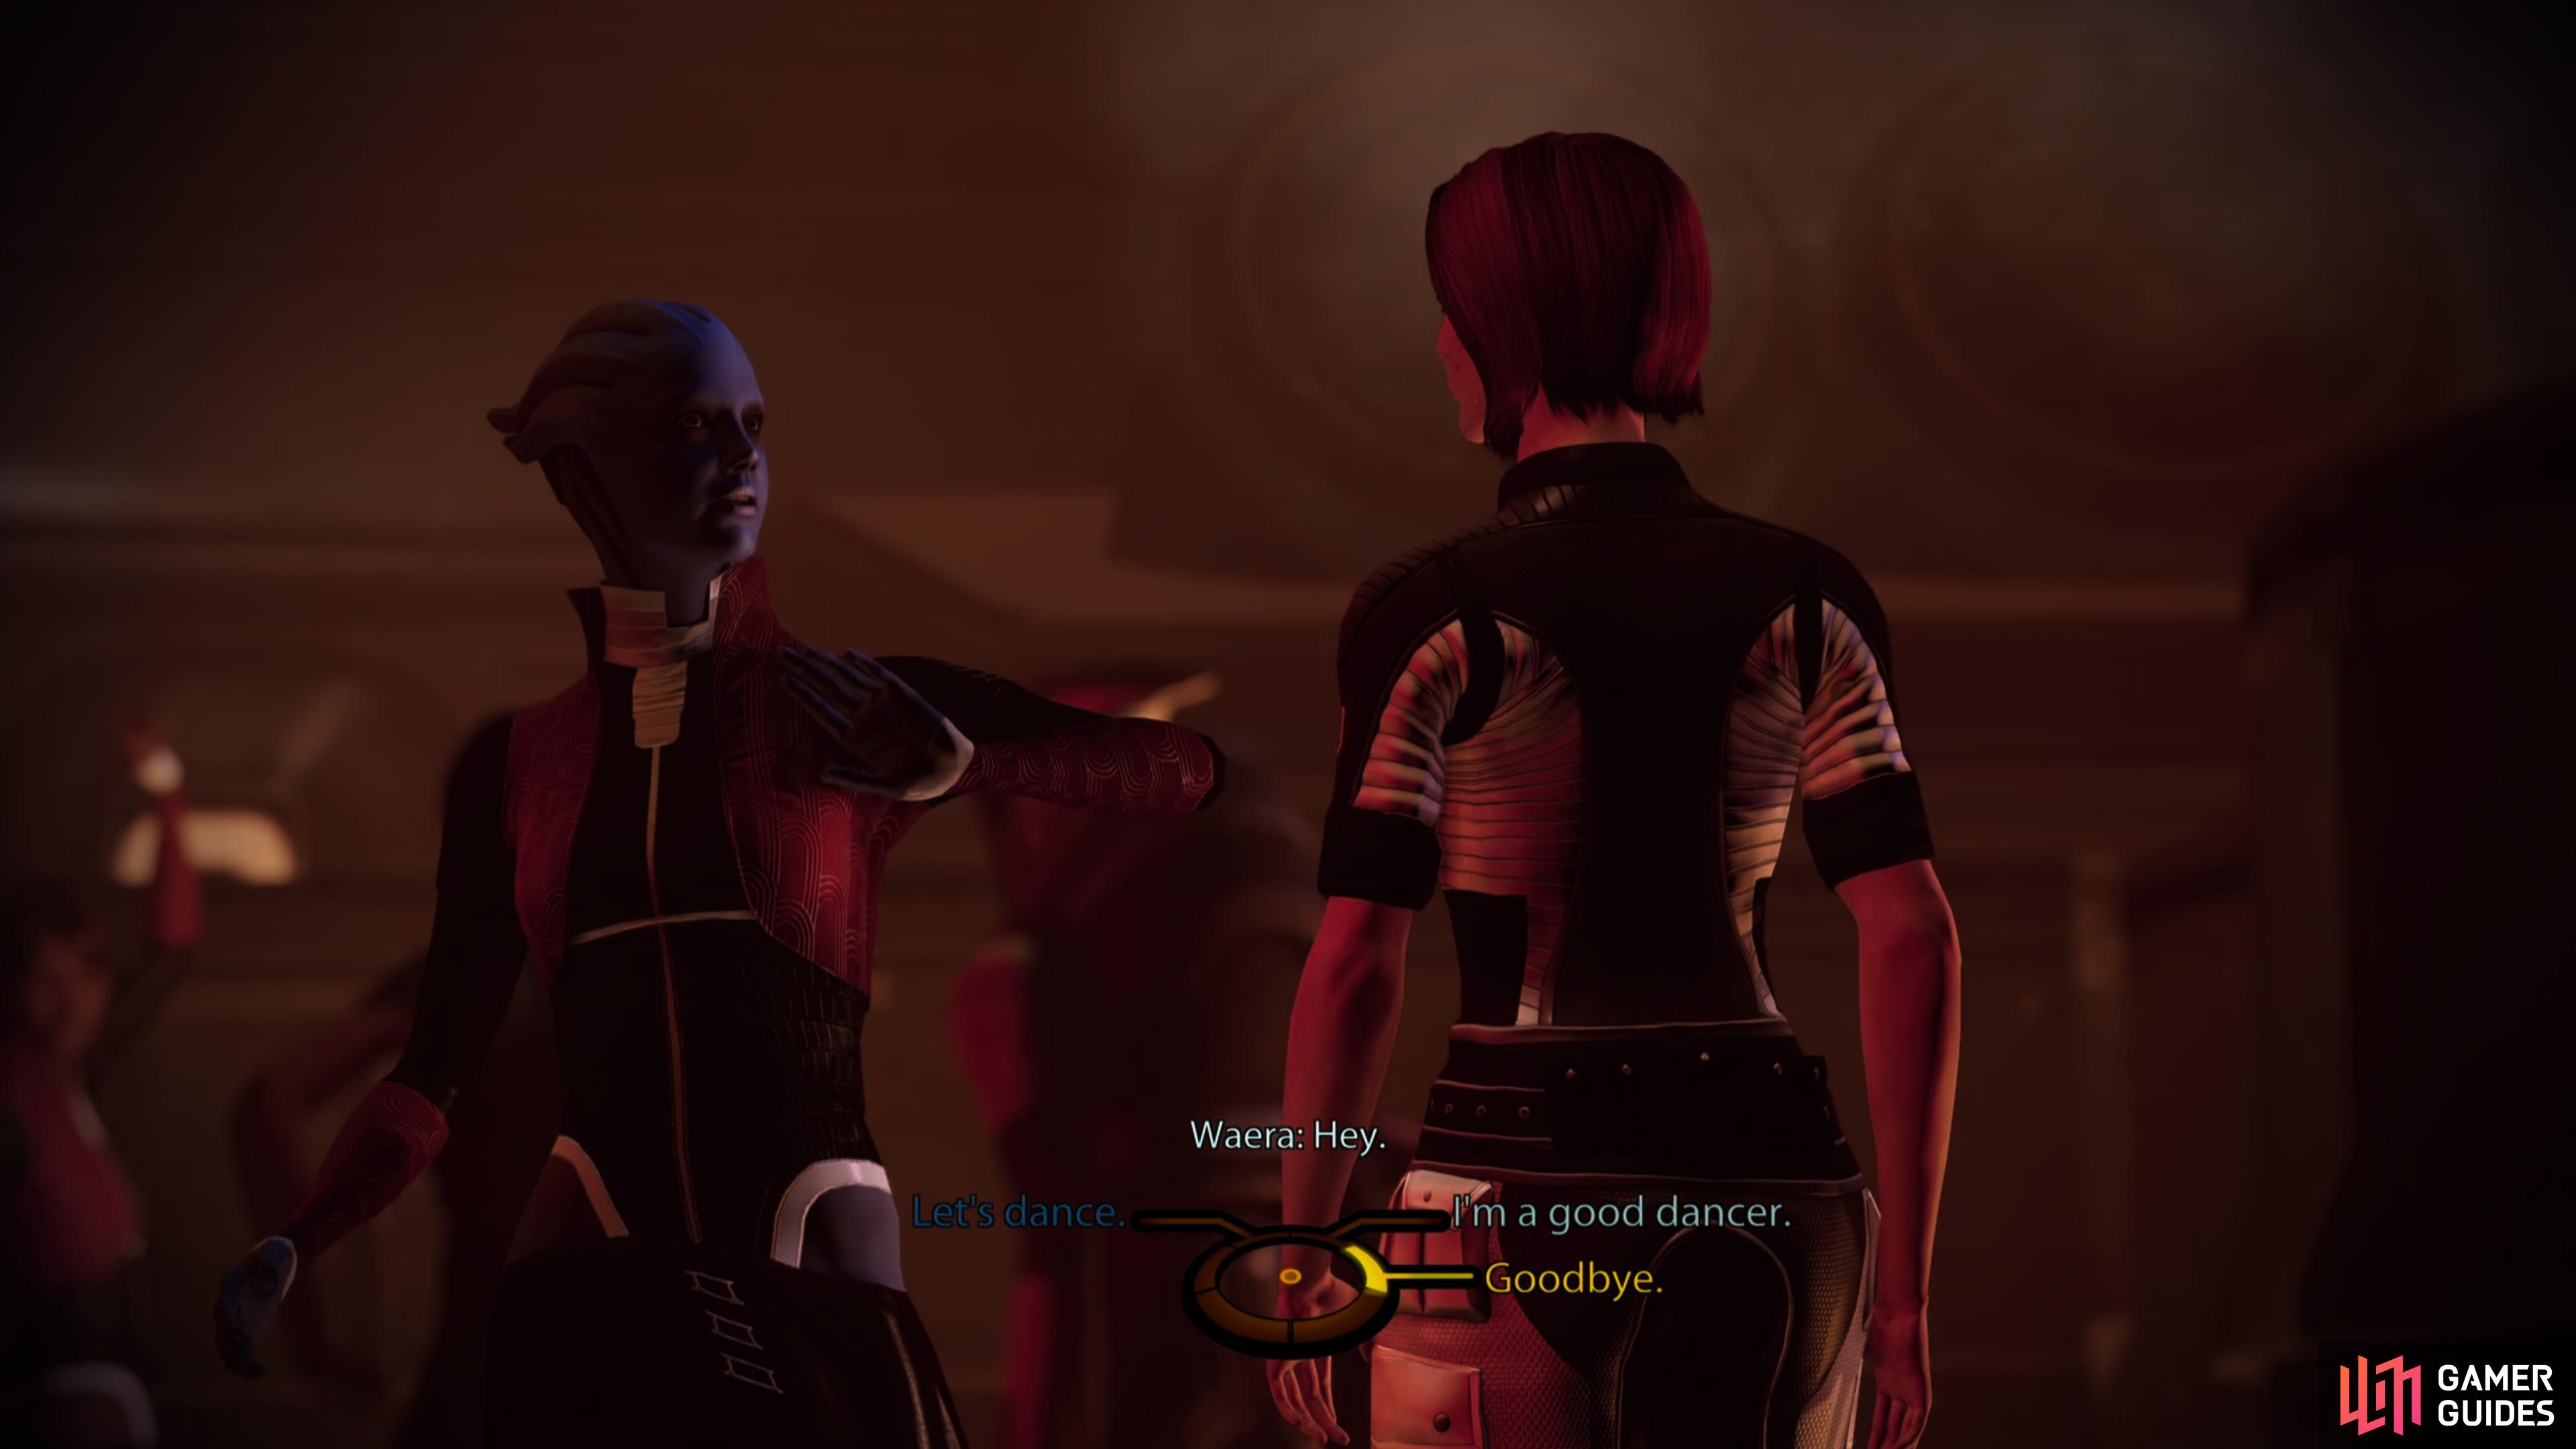 or you can partake in what Shepard incorrectly calls dancing.